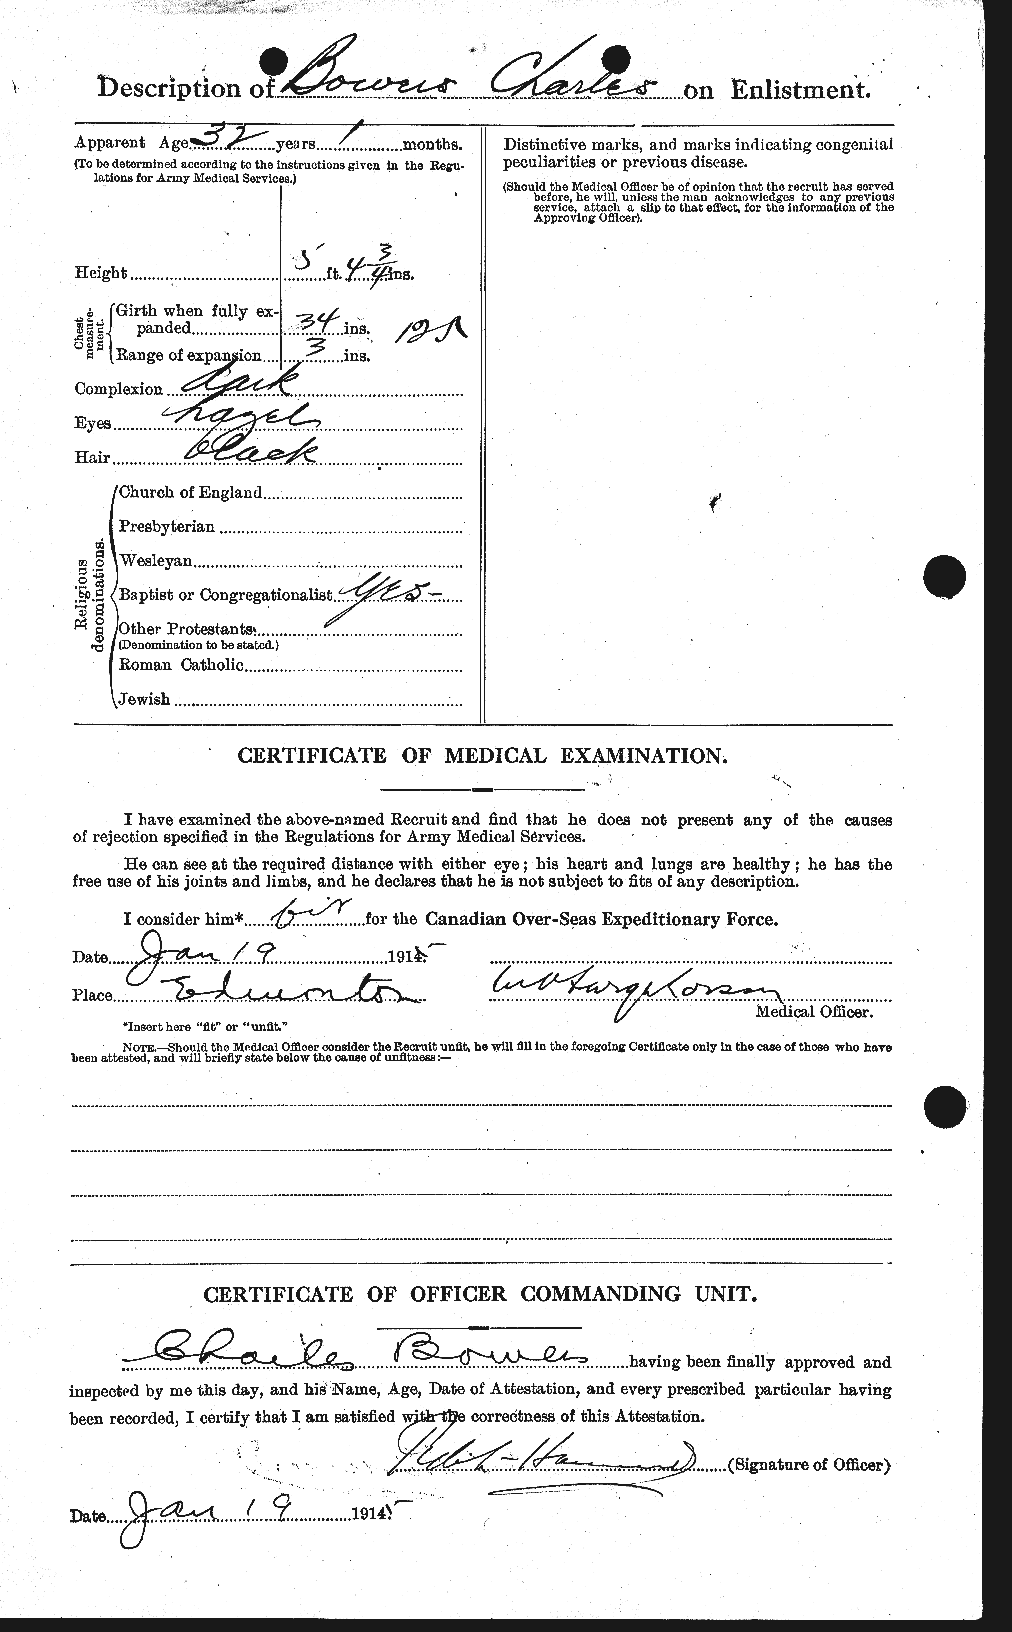 Personnel Records of the First World War - CEF 256821b